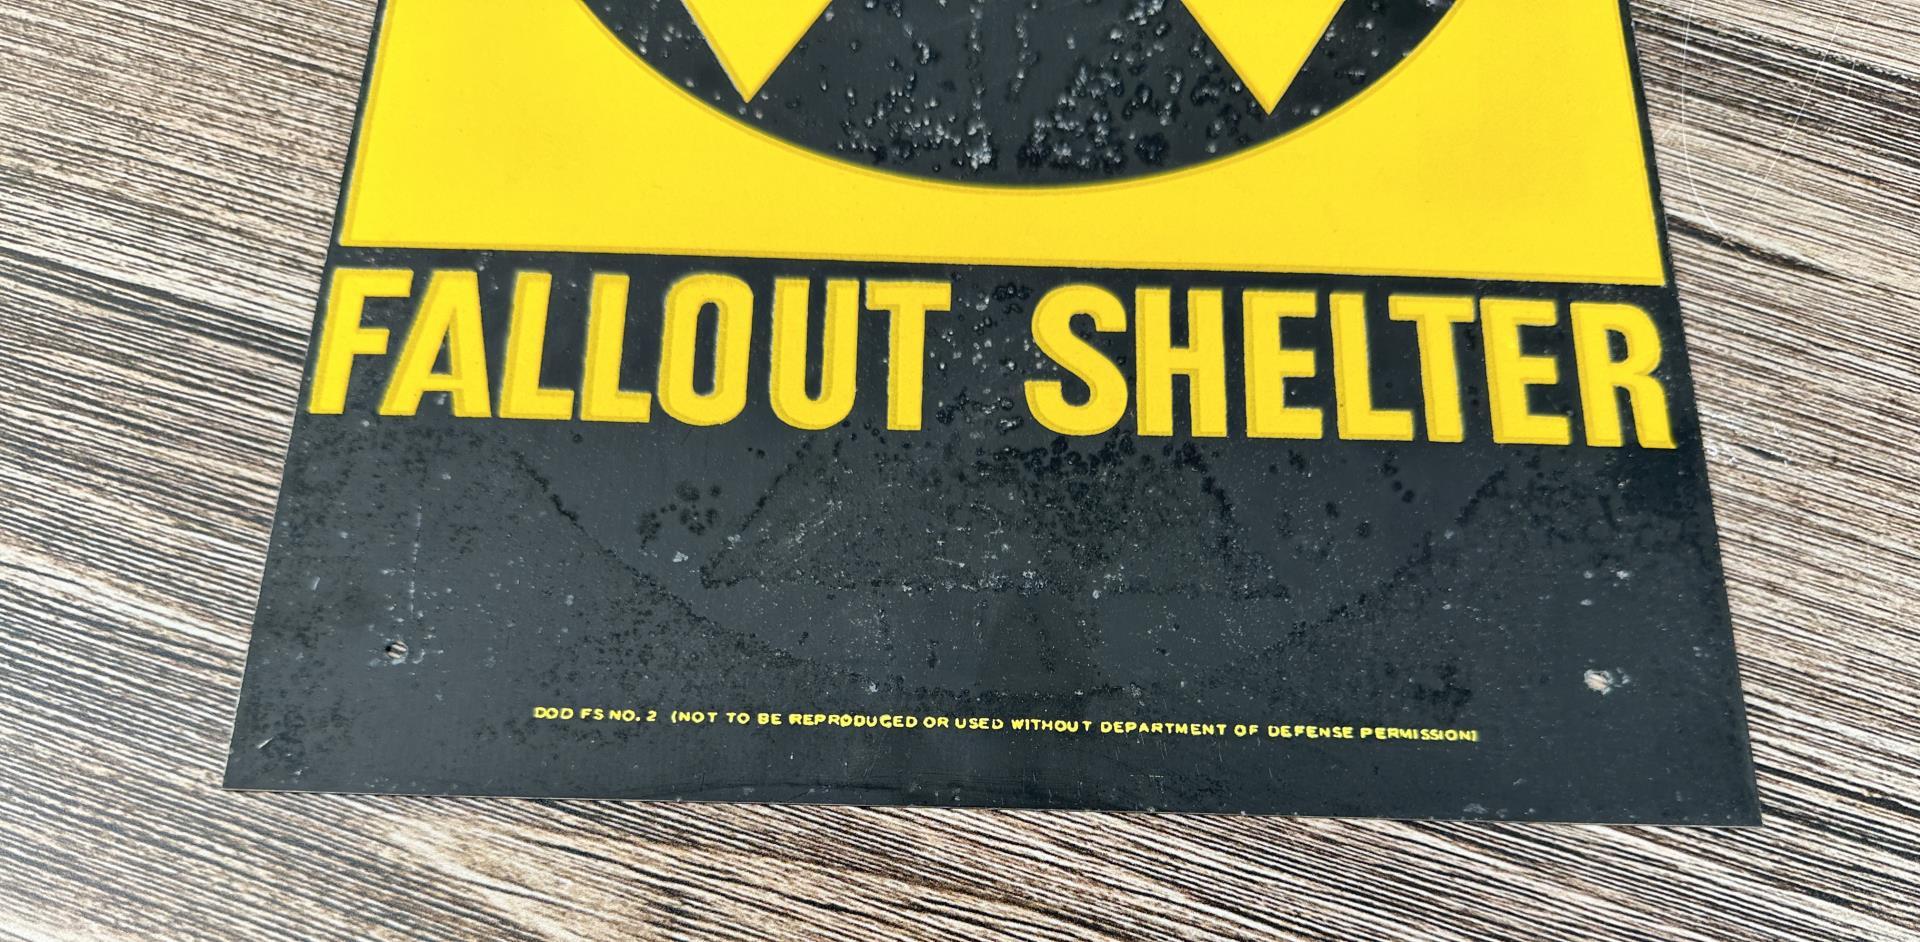 US Department of Defense Fallout Shelter Sign